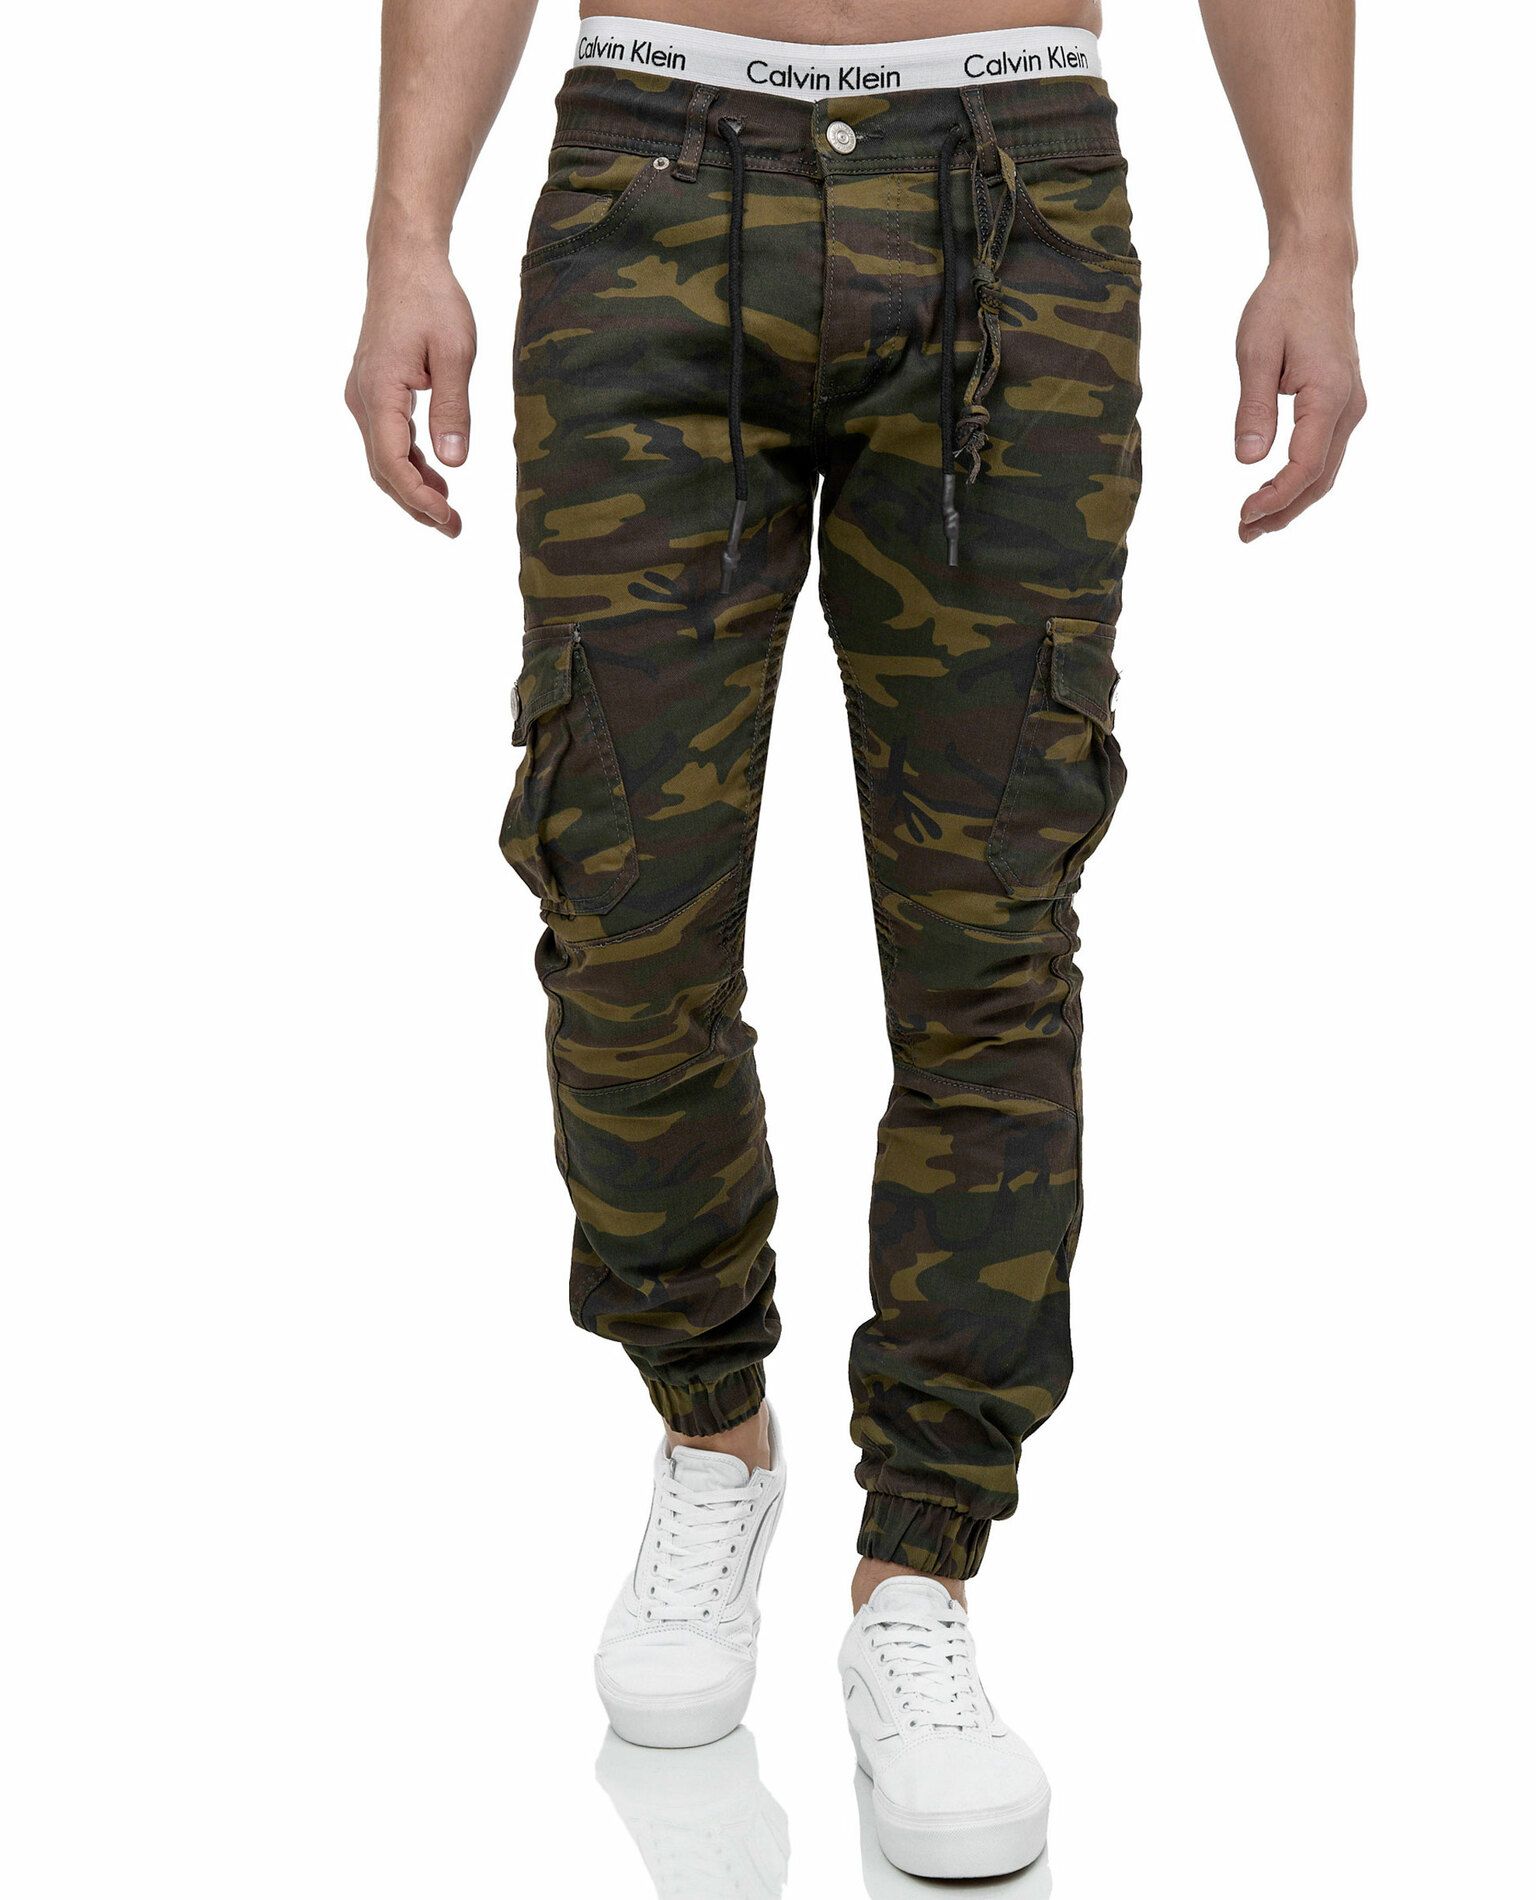 Mike Army Pants L32 Jerone - 3207 - Trousers - Jerone.com